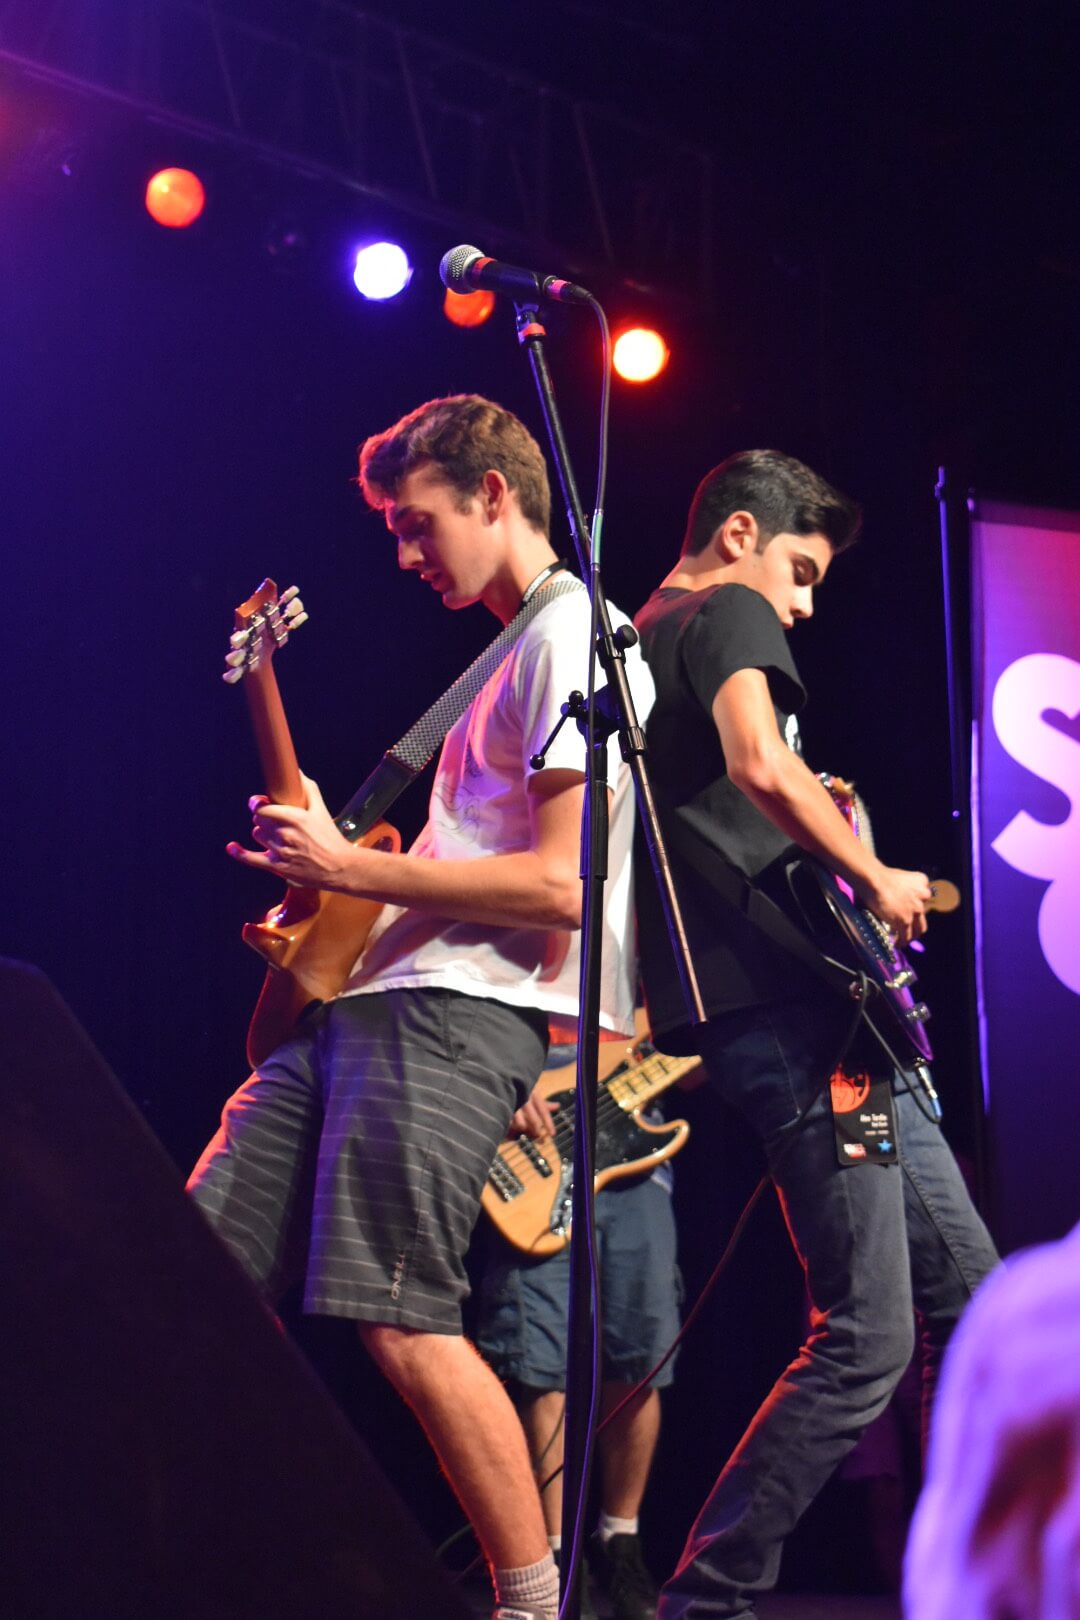 Students perform at Summerfest 2018 in Milwaukee, WI.